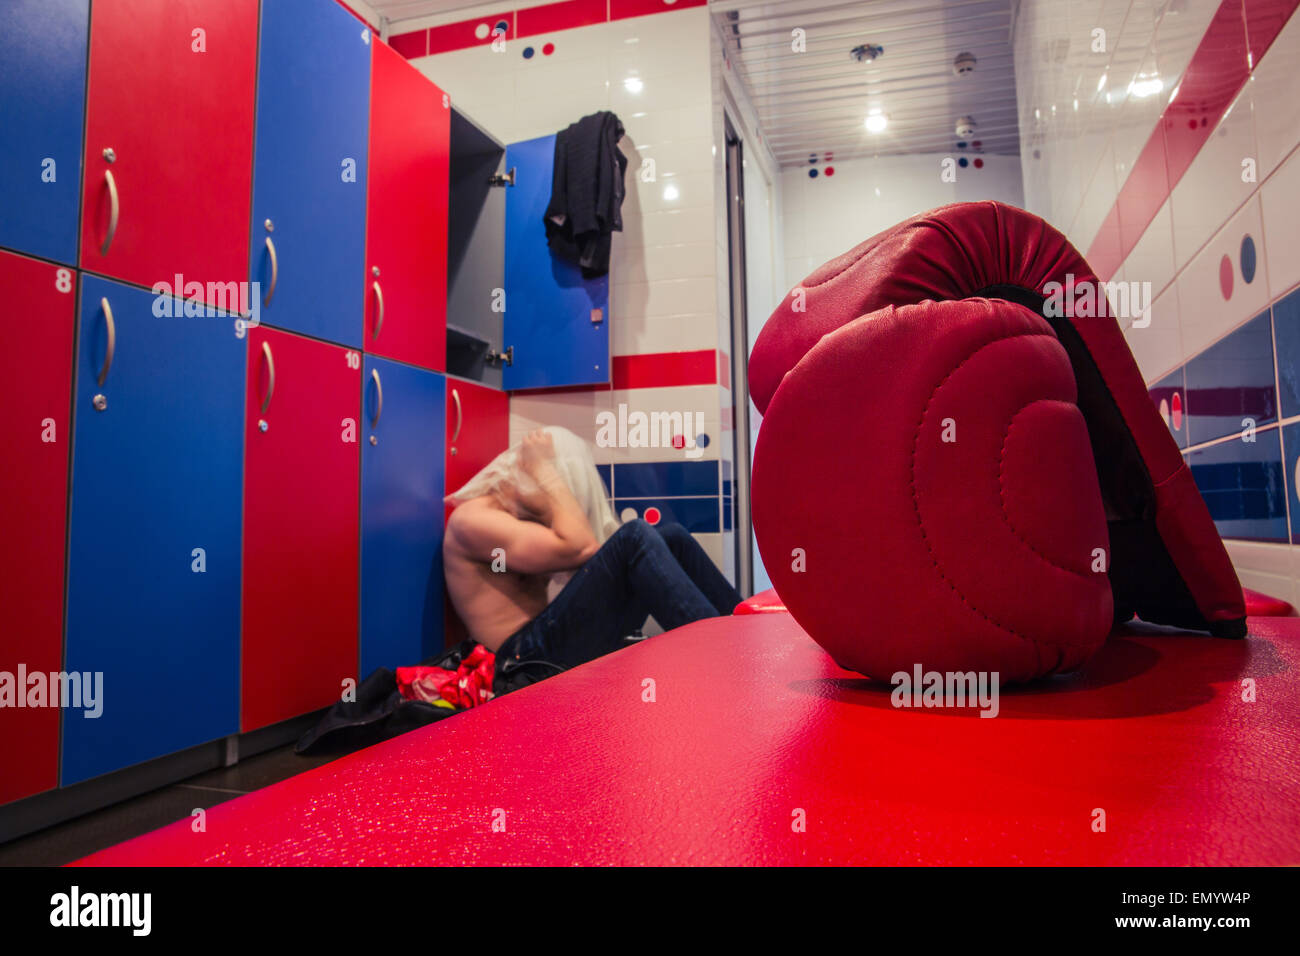 Tired man sitting on the floor in the locker room after finishing training Stock Photo